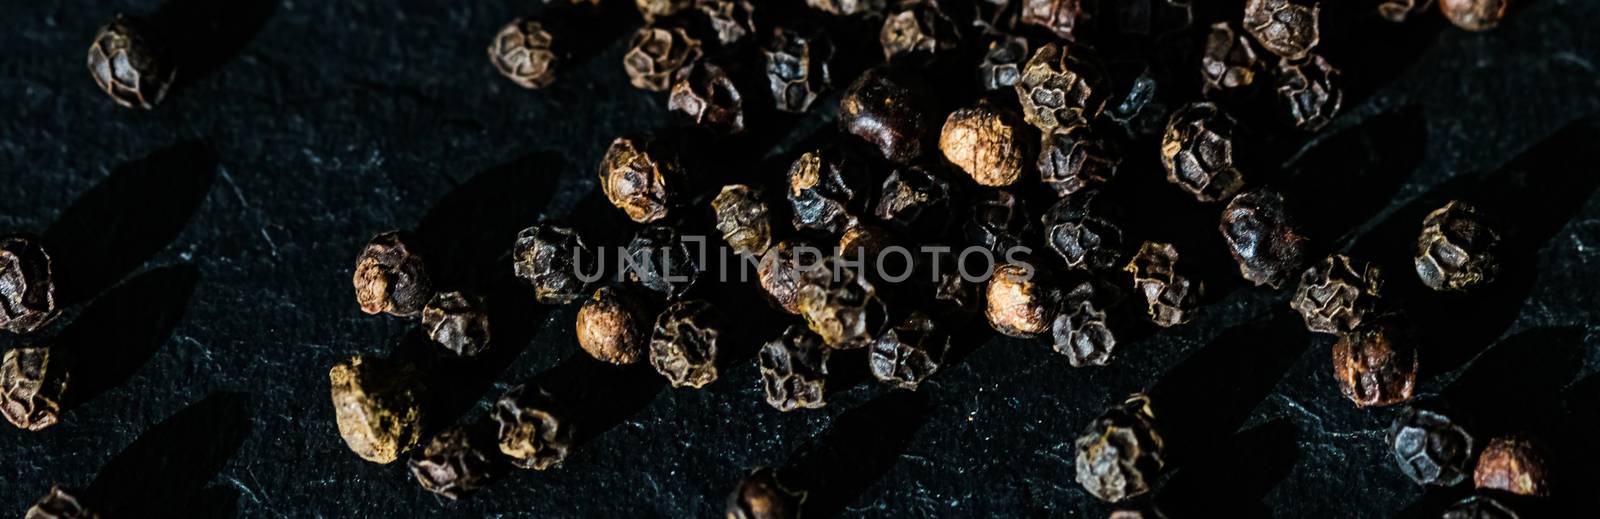 Black pepper closeup on luxury stone background as flat lay, dry by Anneleven